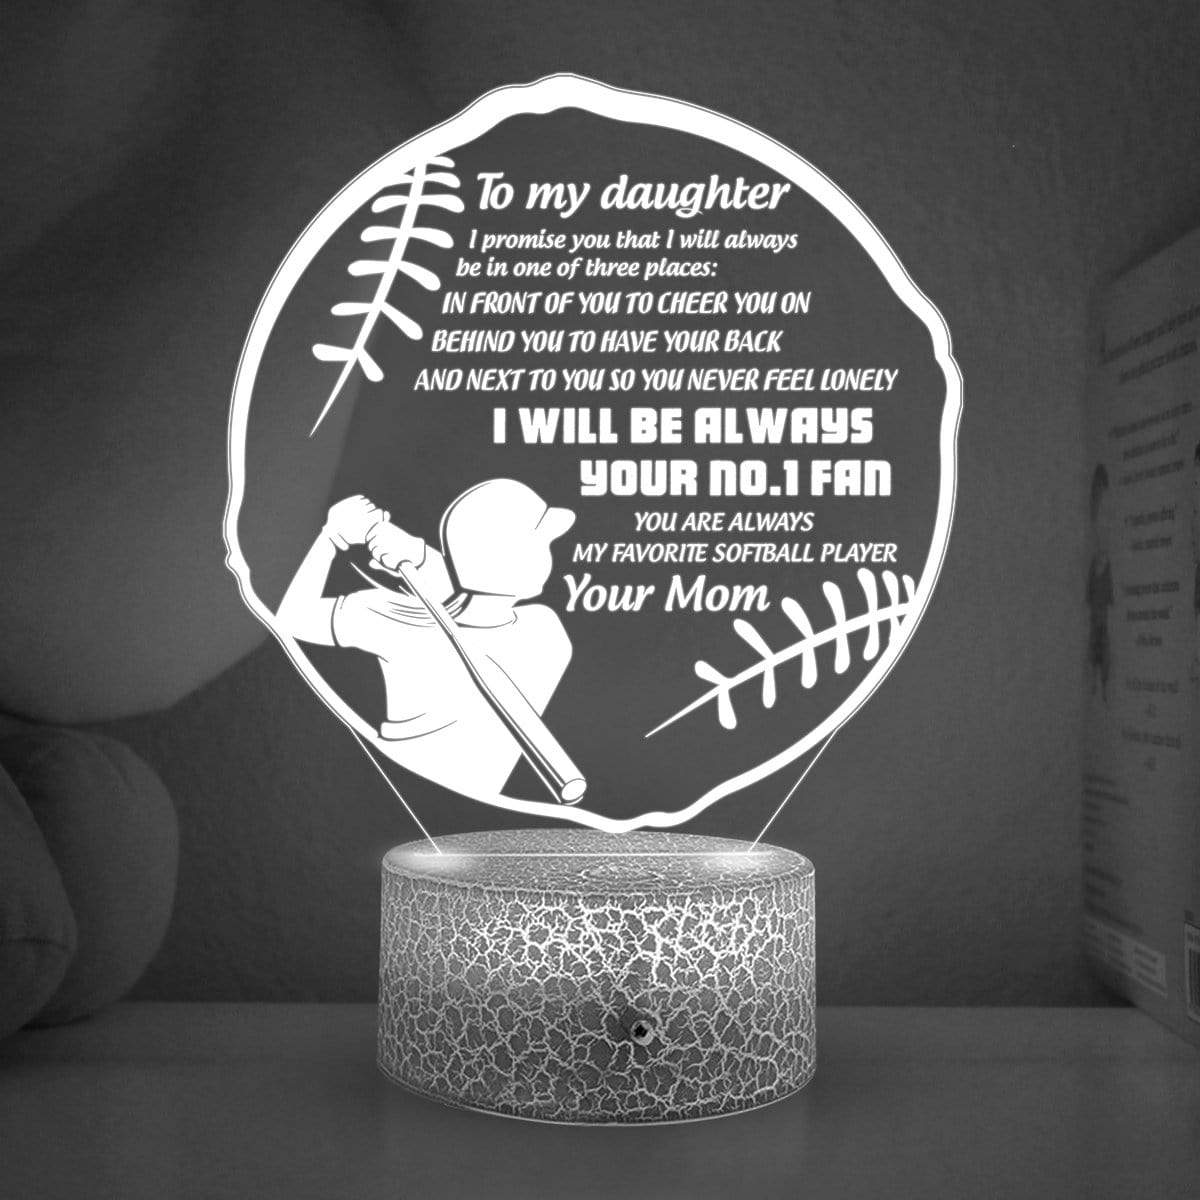 3D Led Light - Softball - From Mom - To My Daughter - In Front Of You To Cheer You On - Glca17002